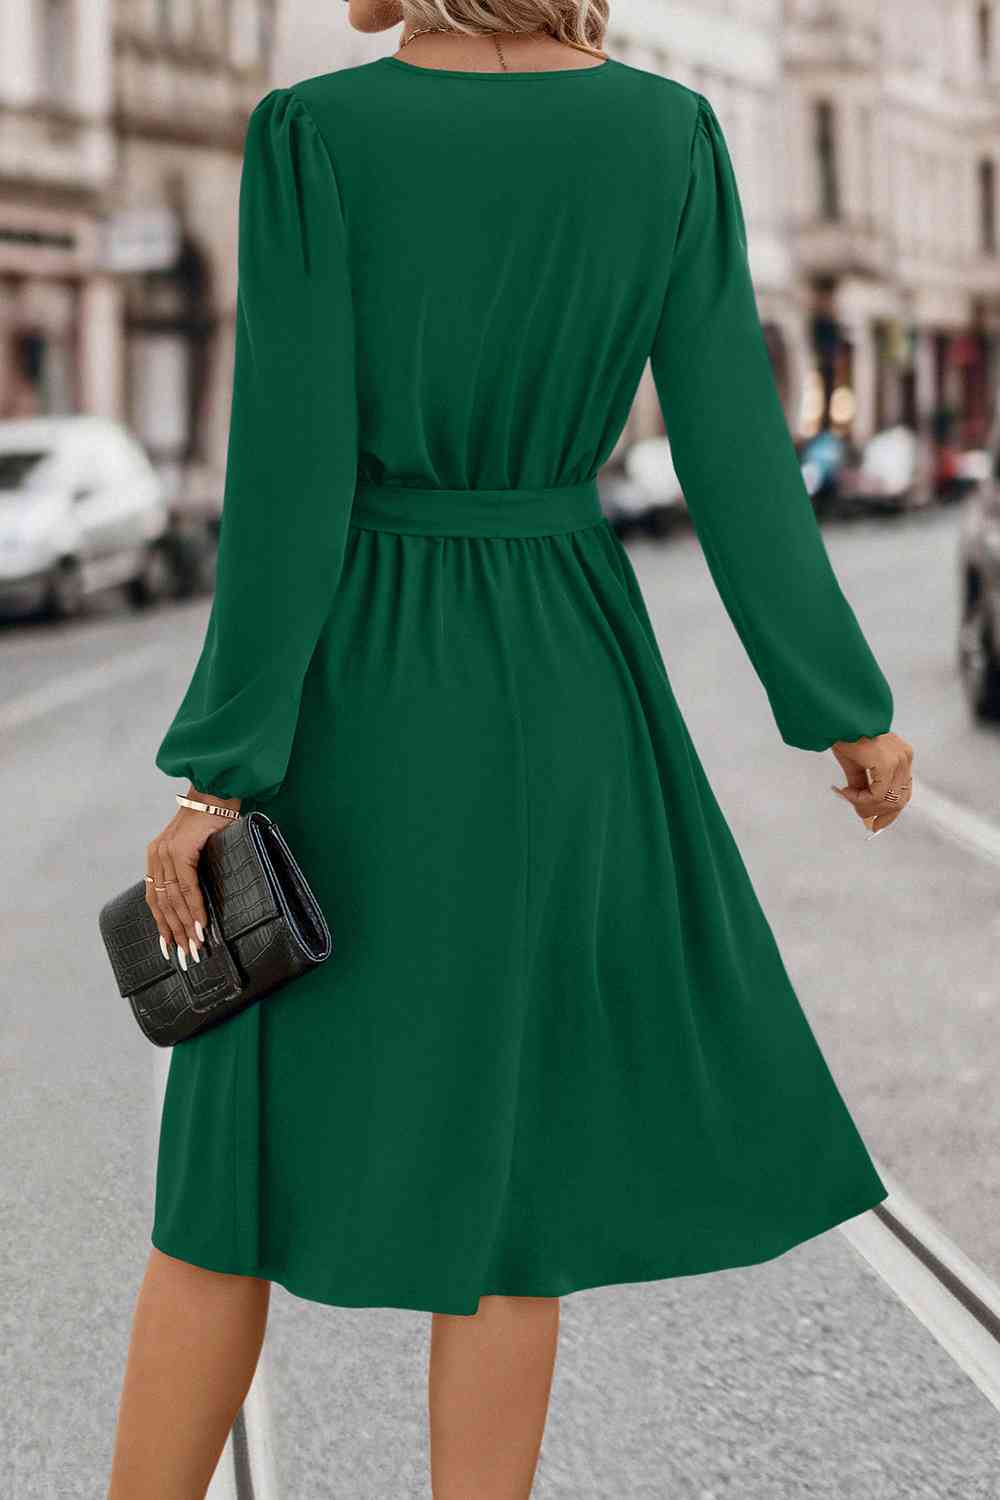 Tie Waist Notched Neck Long Sleeve Dress - Kawaii Stop - Classic, Classic Pumps, Confidence, Dress, Easy Care, Fashion, Long Sleeve Dress, No Stretch, Opaque Sheer, Ship From Overseas, Statement Necklace, Style, Tie Waist Dress, Timeless Fashion, Women's Clothing, YO